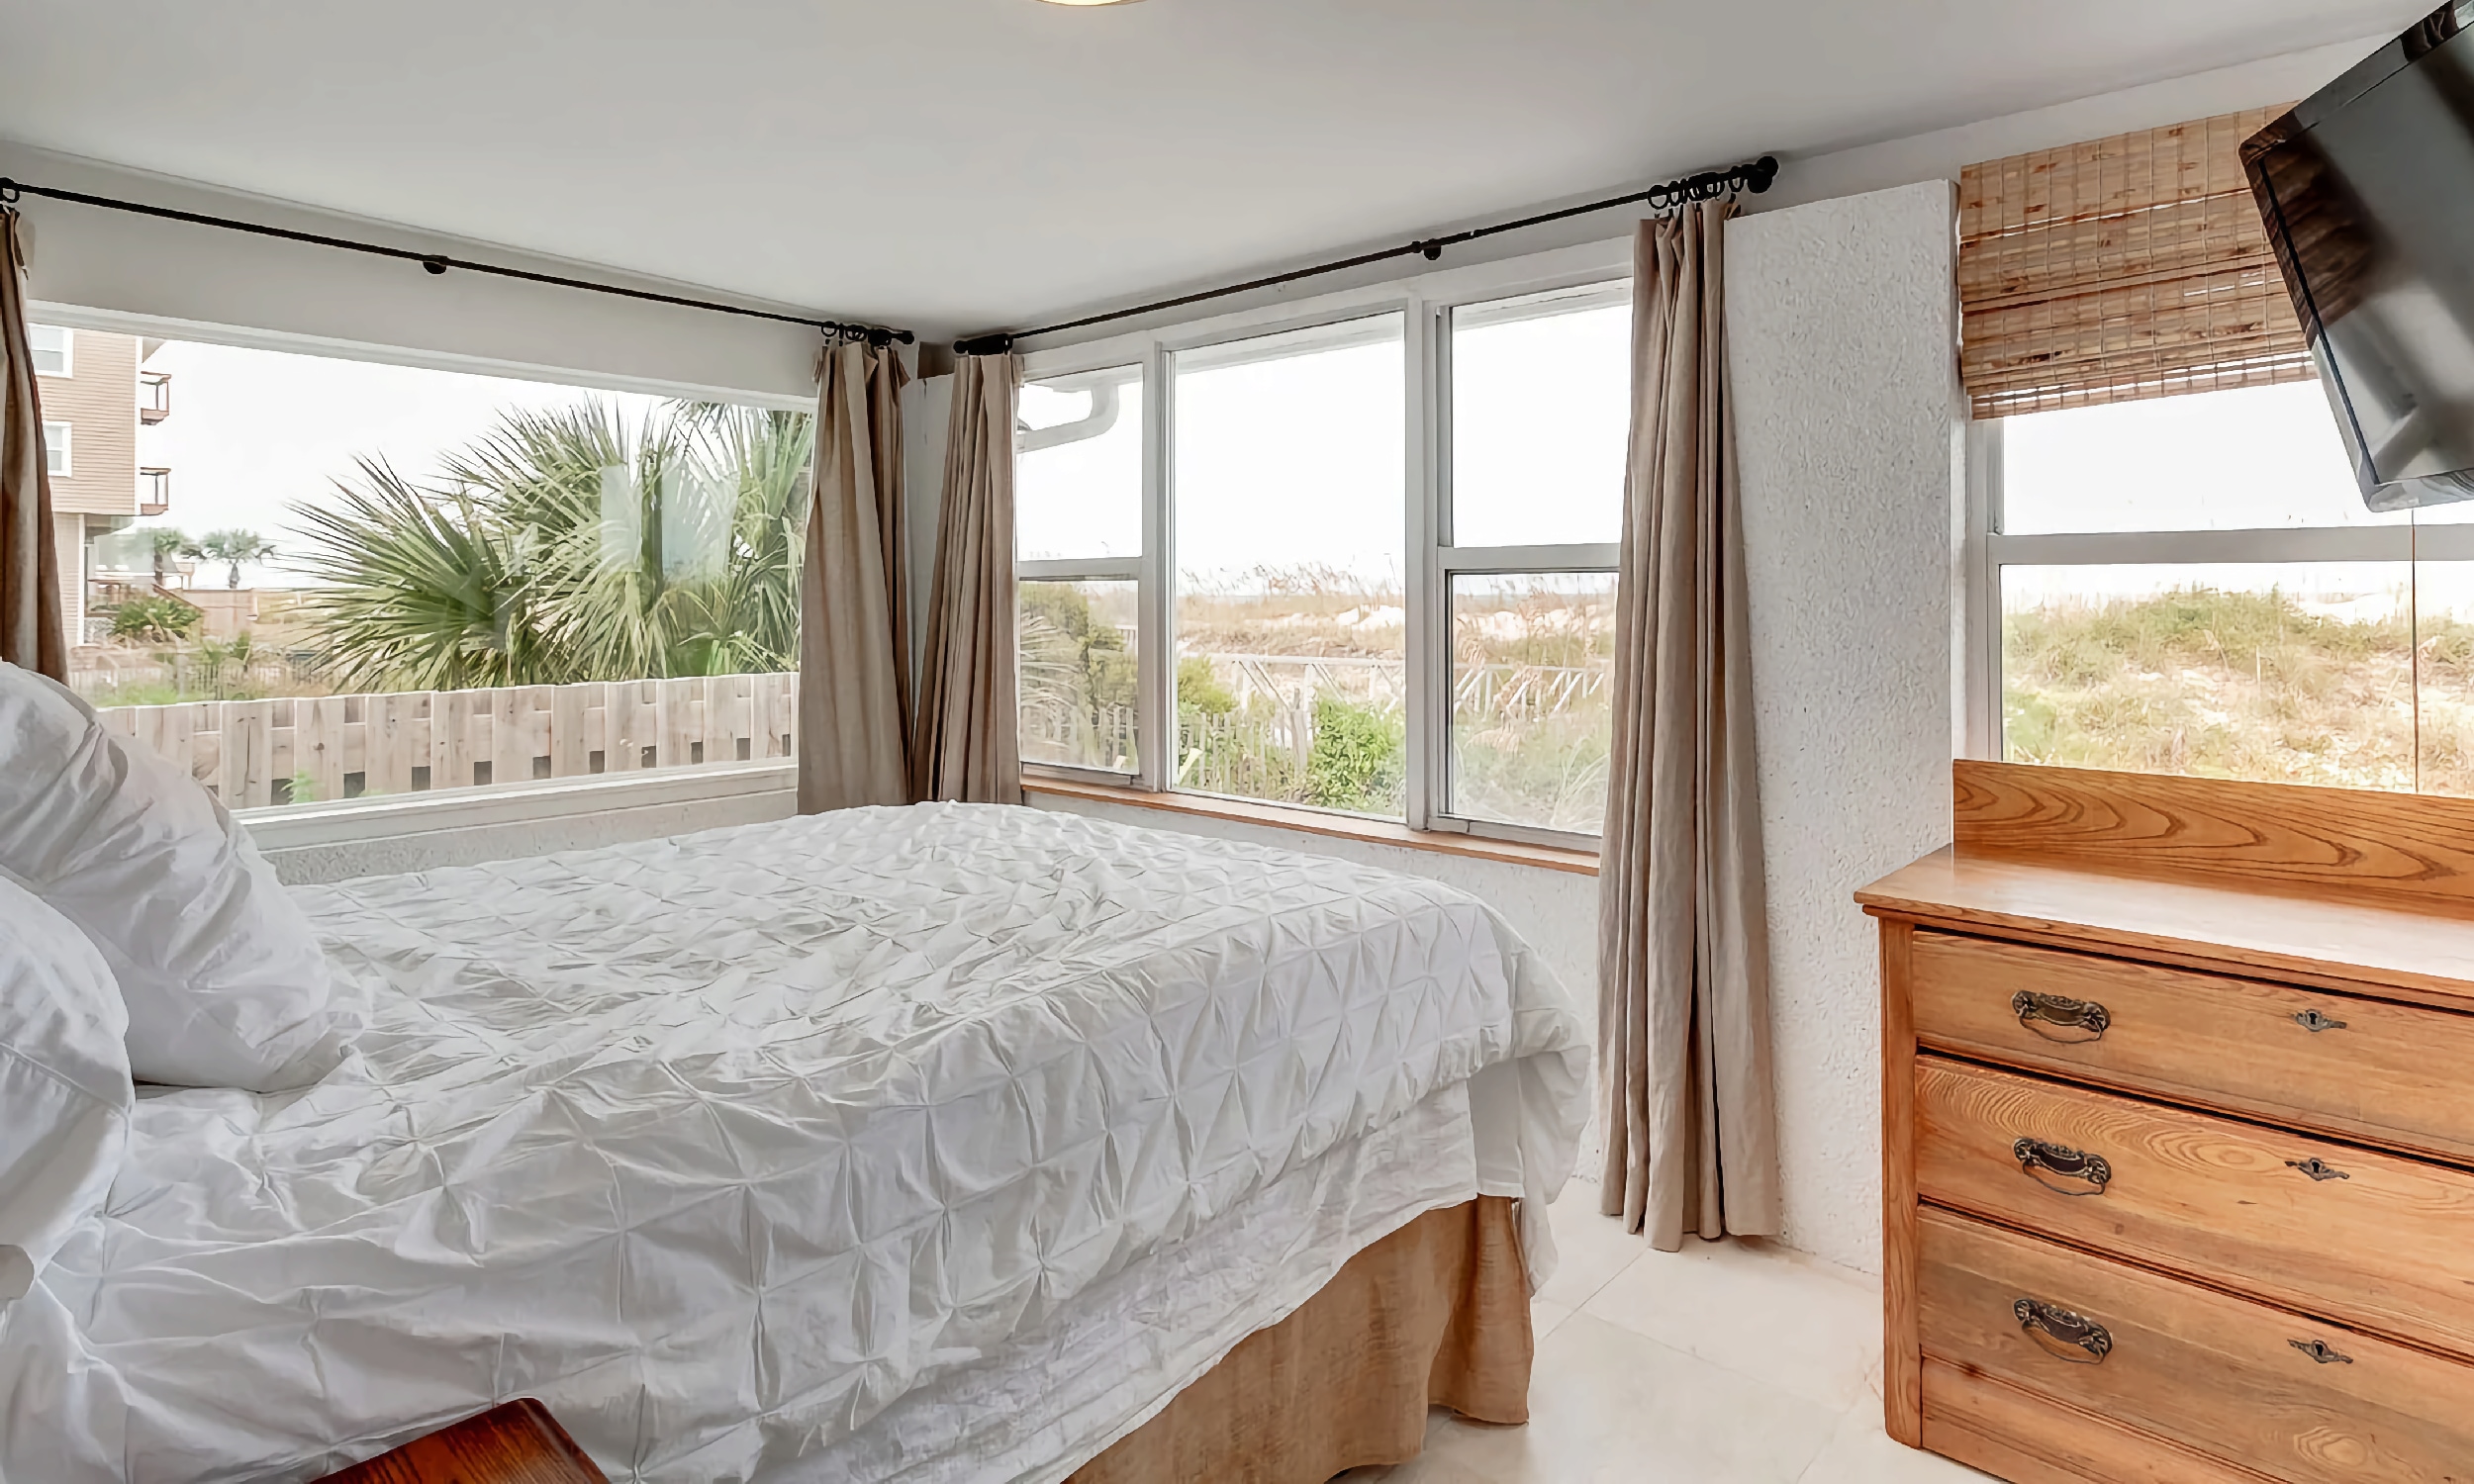 A bedroom on St. Augustine Beach has a view of the dunes and the Atlantic Ocean